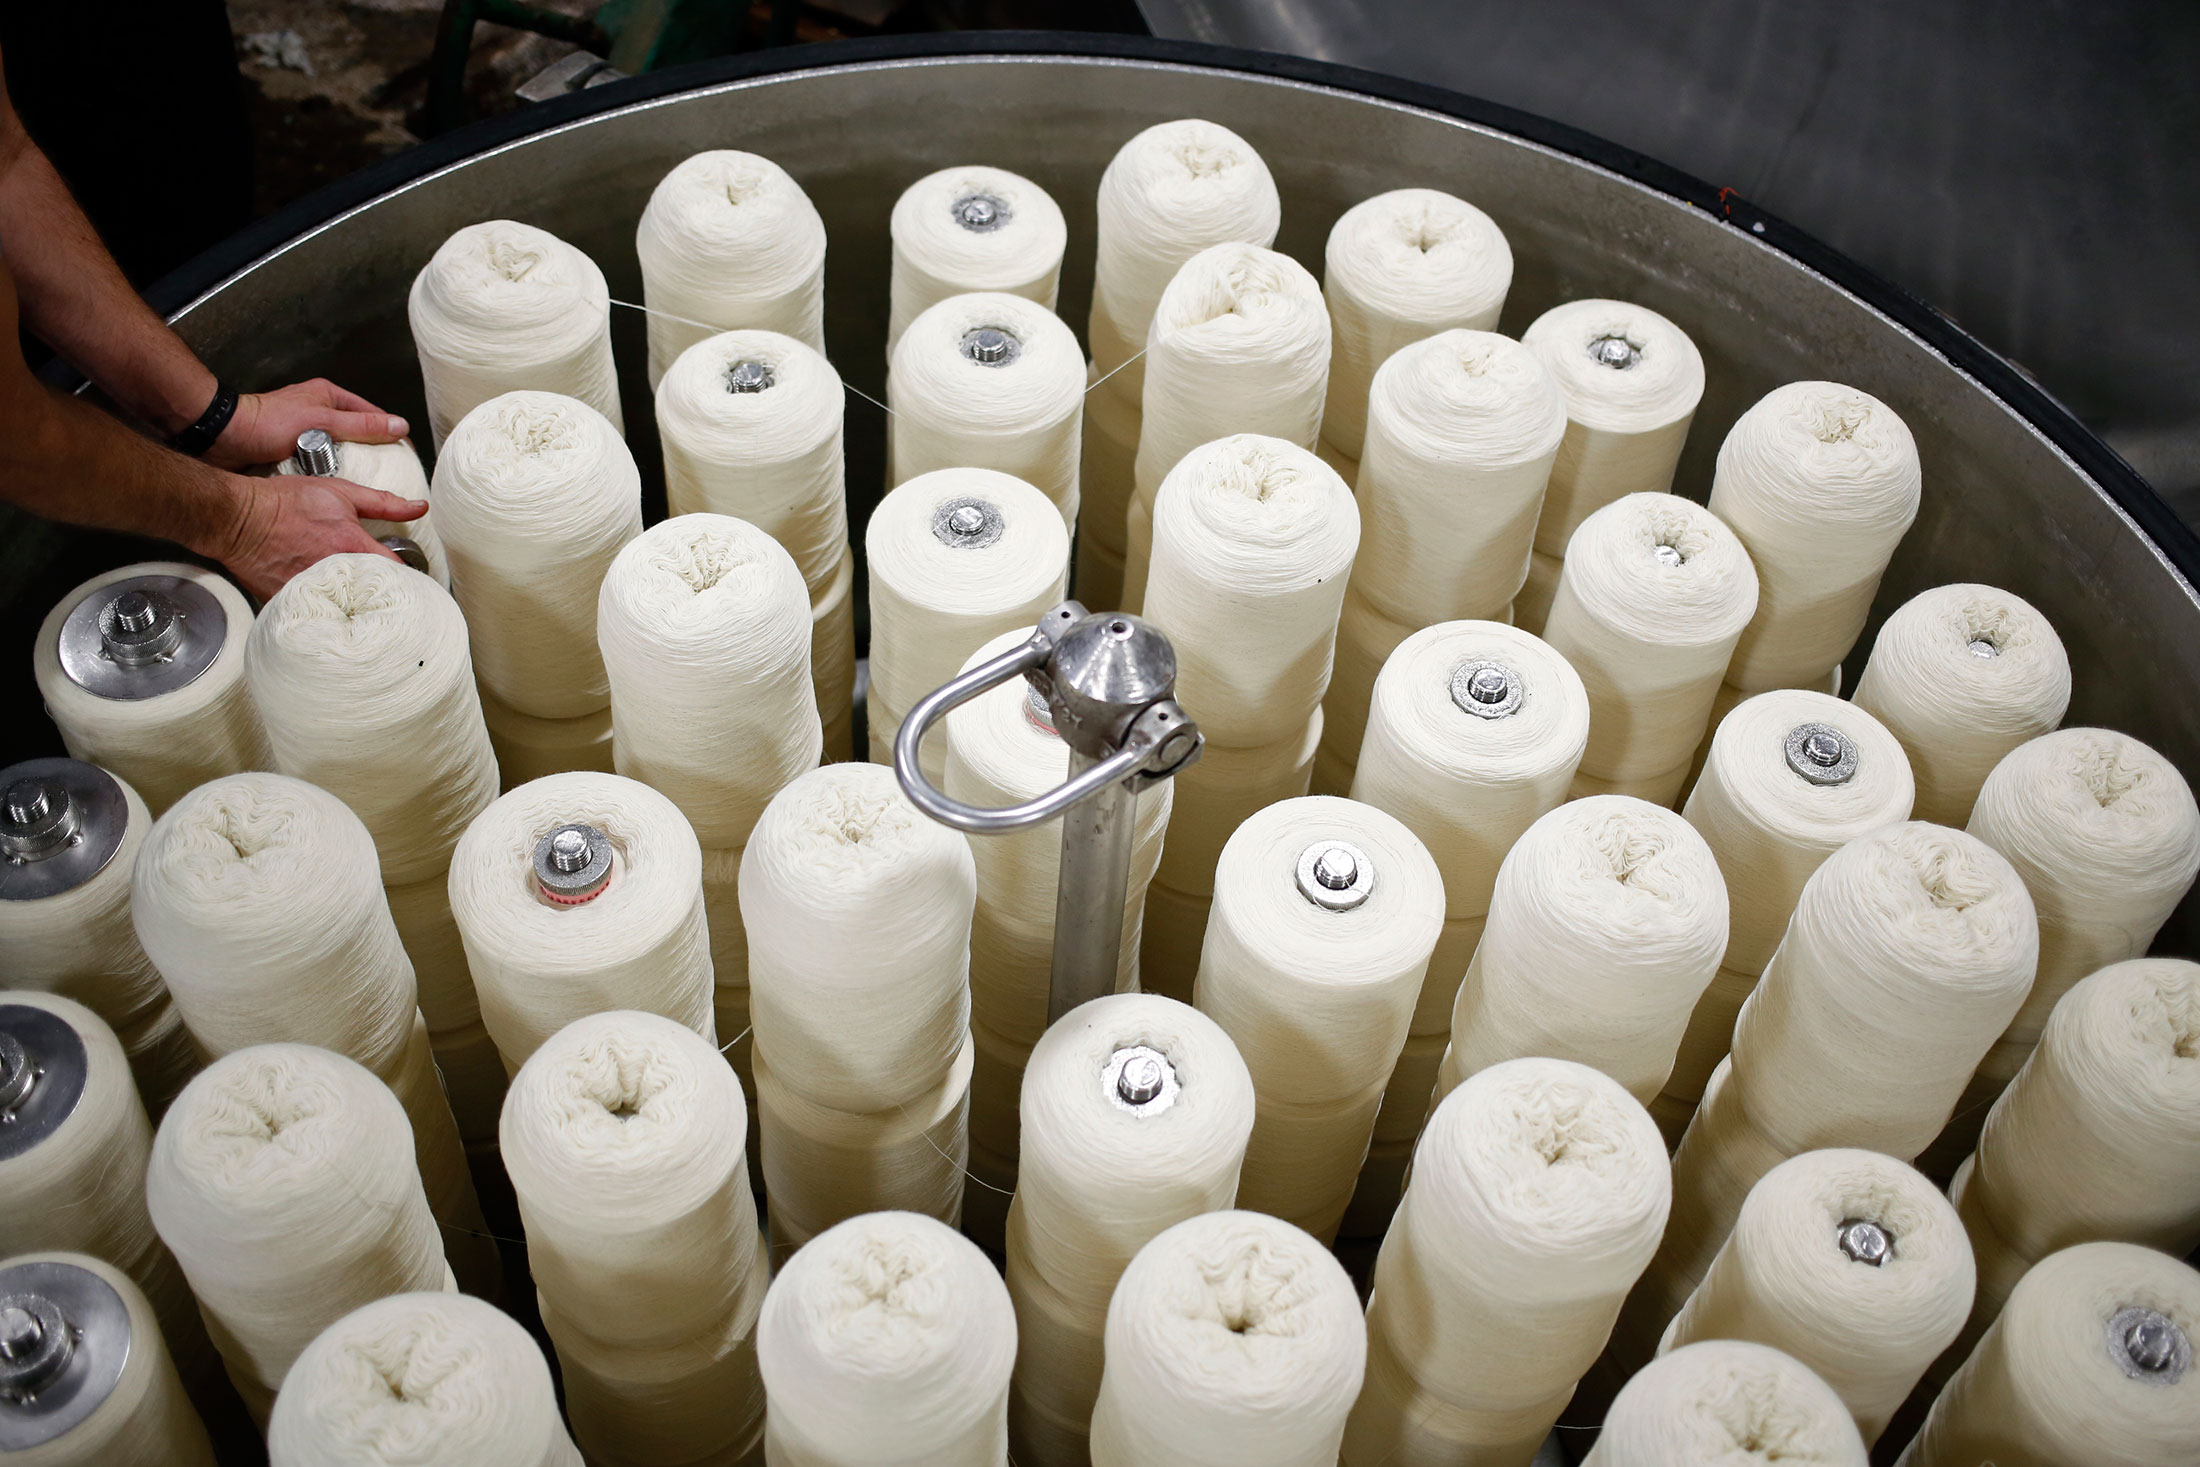 An employee secures packages of raw wool in a tank used to dye wool at the Woolrich Inc. woolen mill in Woolrich, Pennsylvania, U.S., on Wednesday, Nov. 4, 2015. Woolrich, the legendary Pennsylvania-based fabric maker, has been the source of classic, outdoorsy offerings—such as buffalo check shirts and warm, durable blankets—since 1830. Today, the iconic heritage brand sill churns out its heirloom-quality wool blankets by hand at the U.S.'s oldest continuously operating woolen mill.
